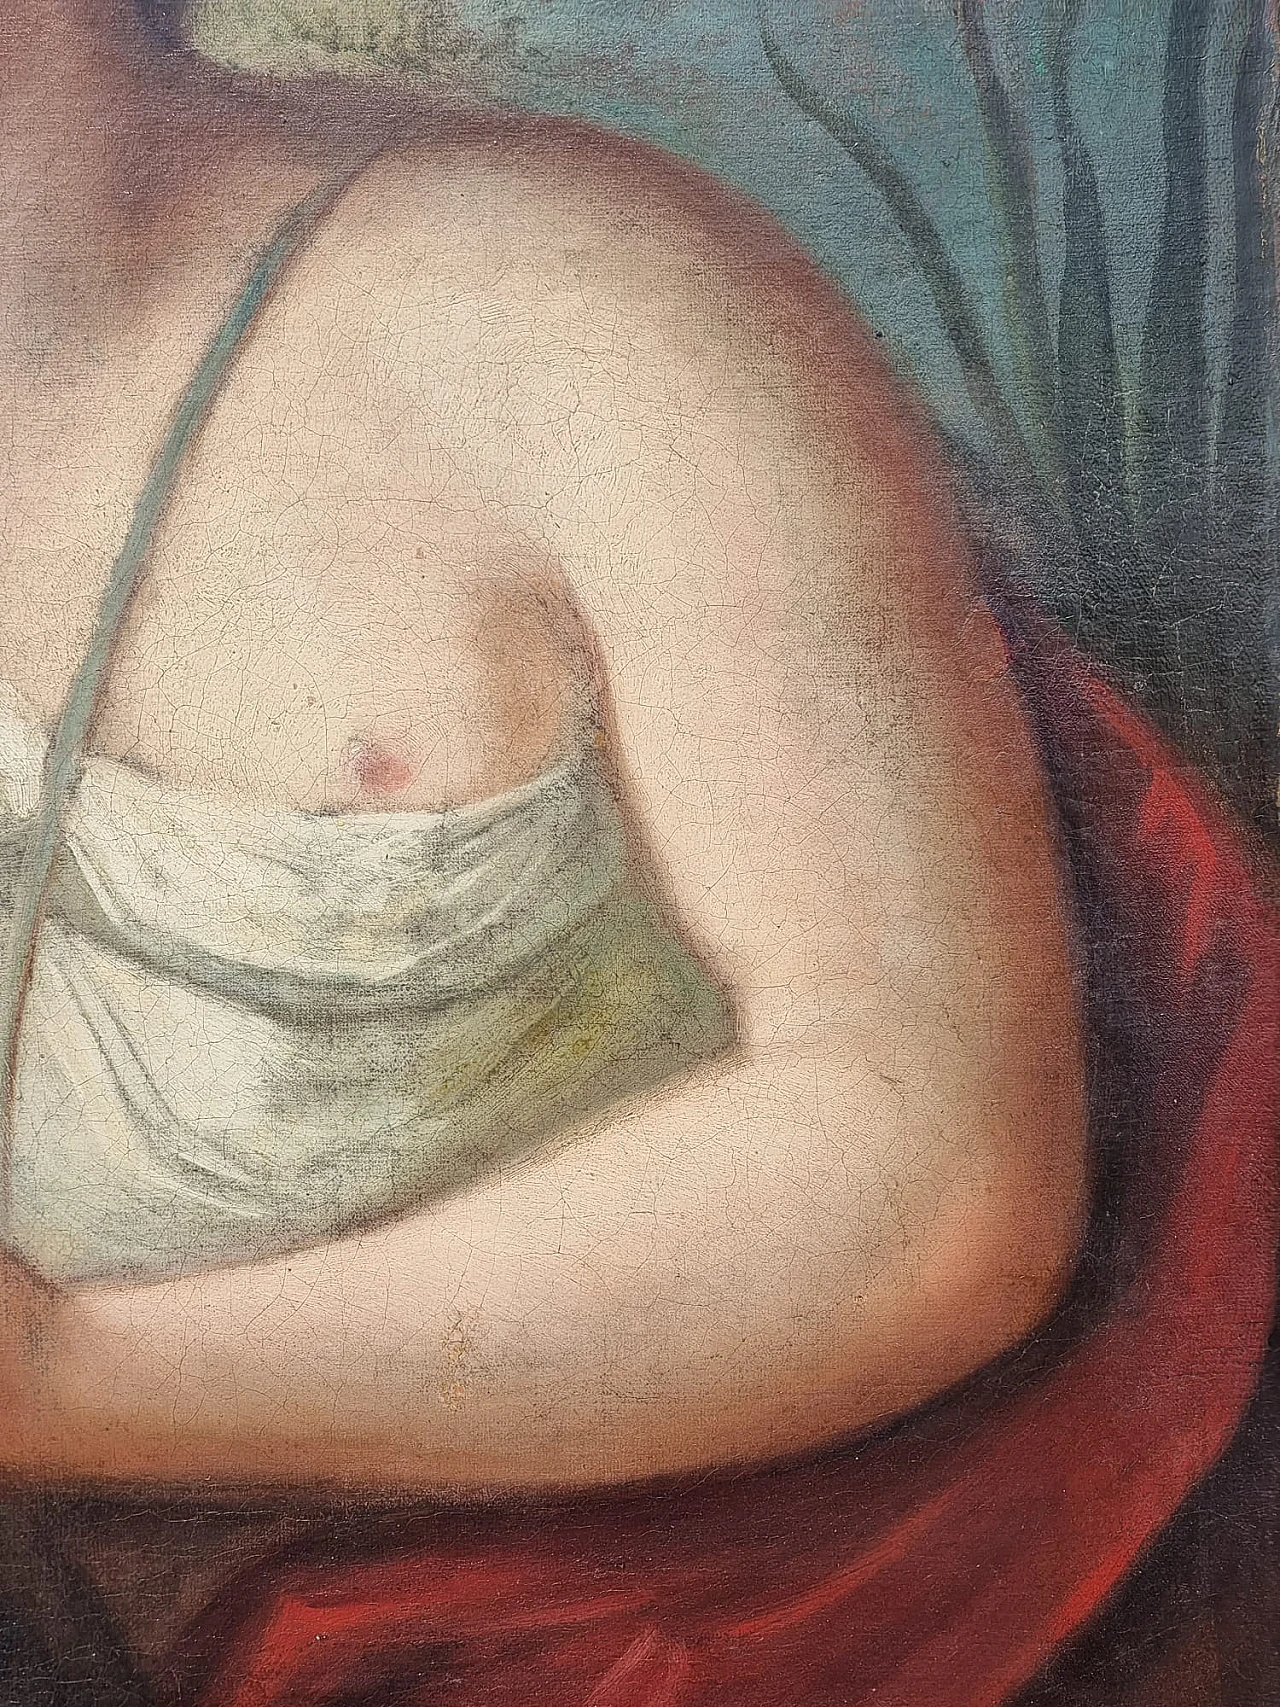 Water nymph, oil painting on canvas, 18th century 3